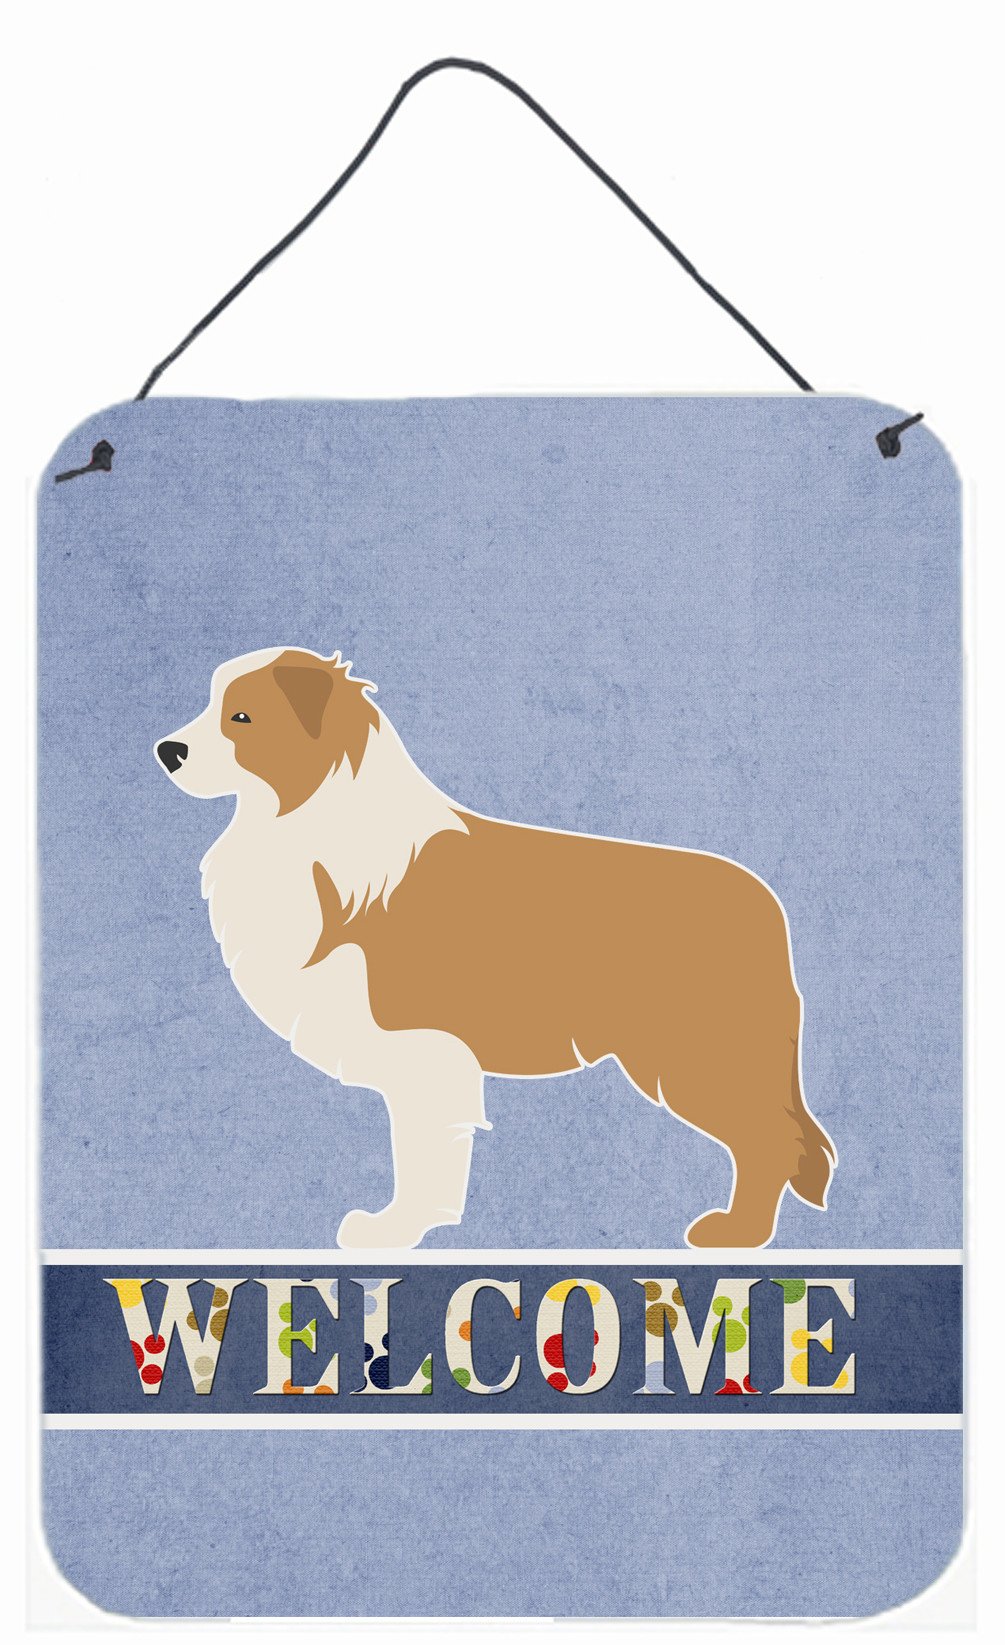 Red Border Collie Welcome Wall or Door Hanging Prints BB5526DS1216 by Caroline's Treasures